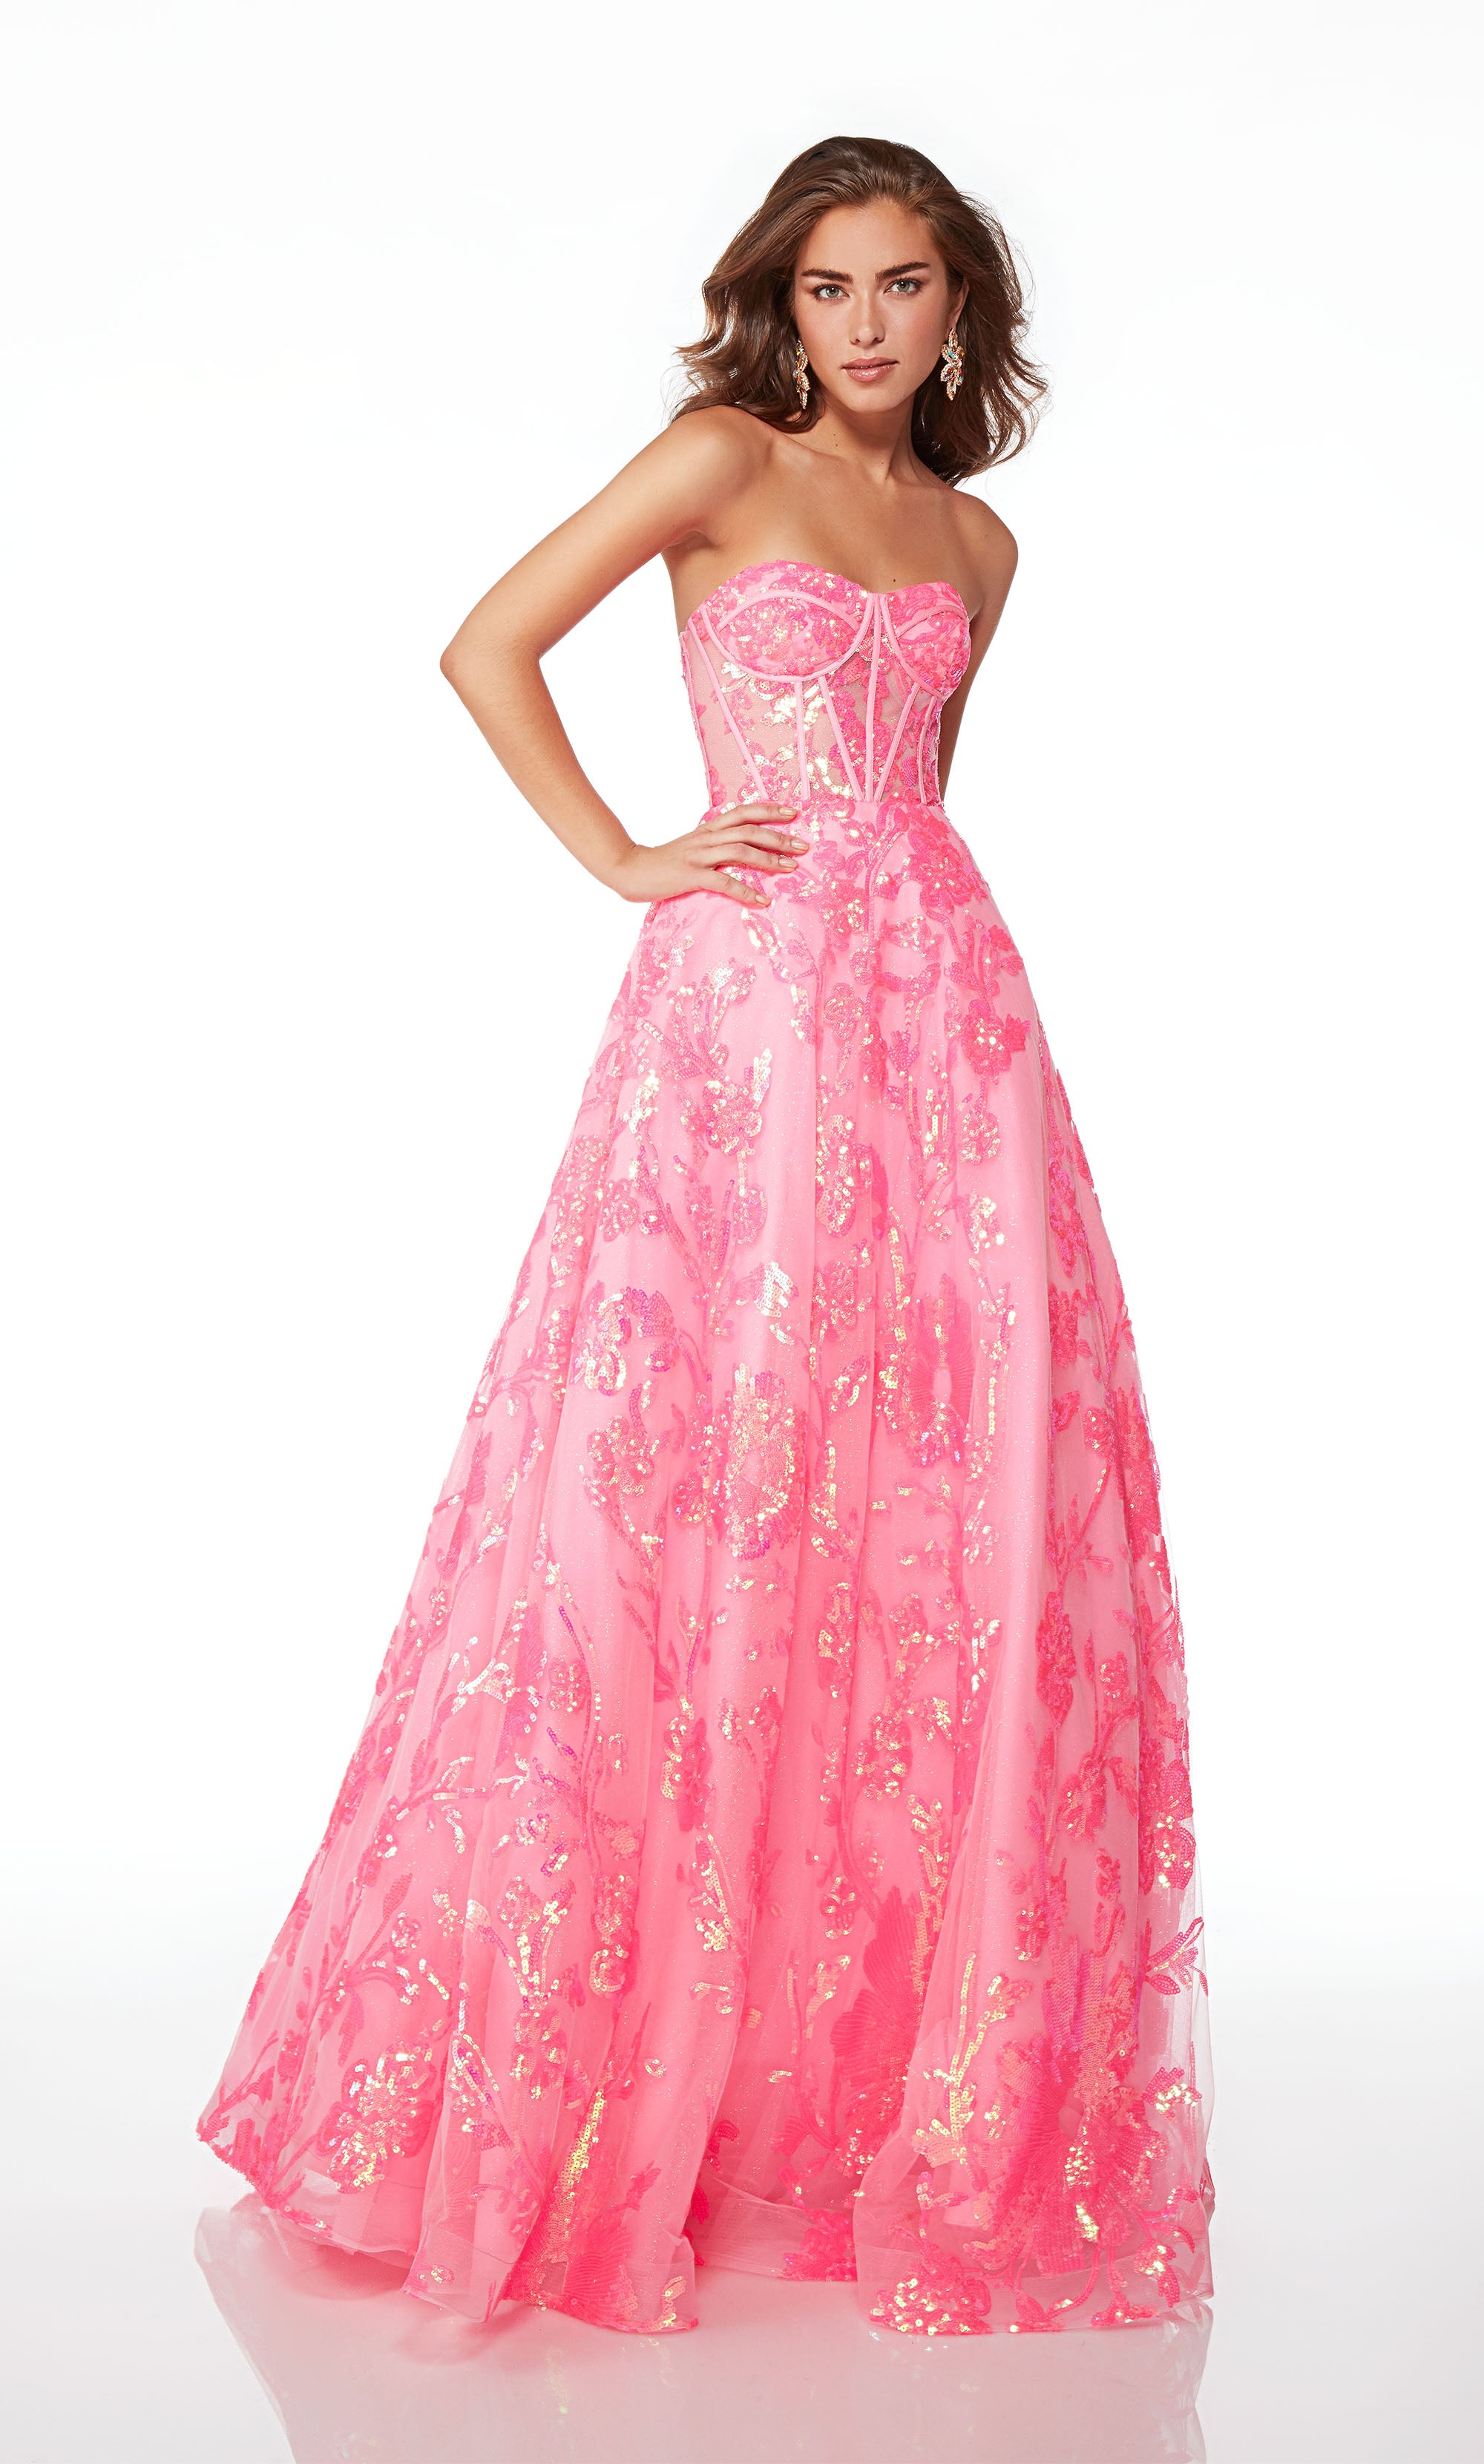 Formal Dress: 61515. Long, Strapless, Ballgown, Lace-up Back